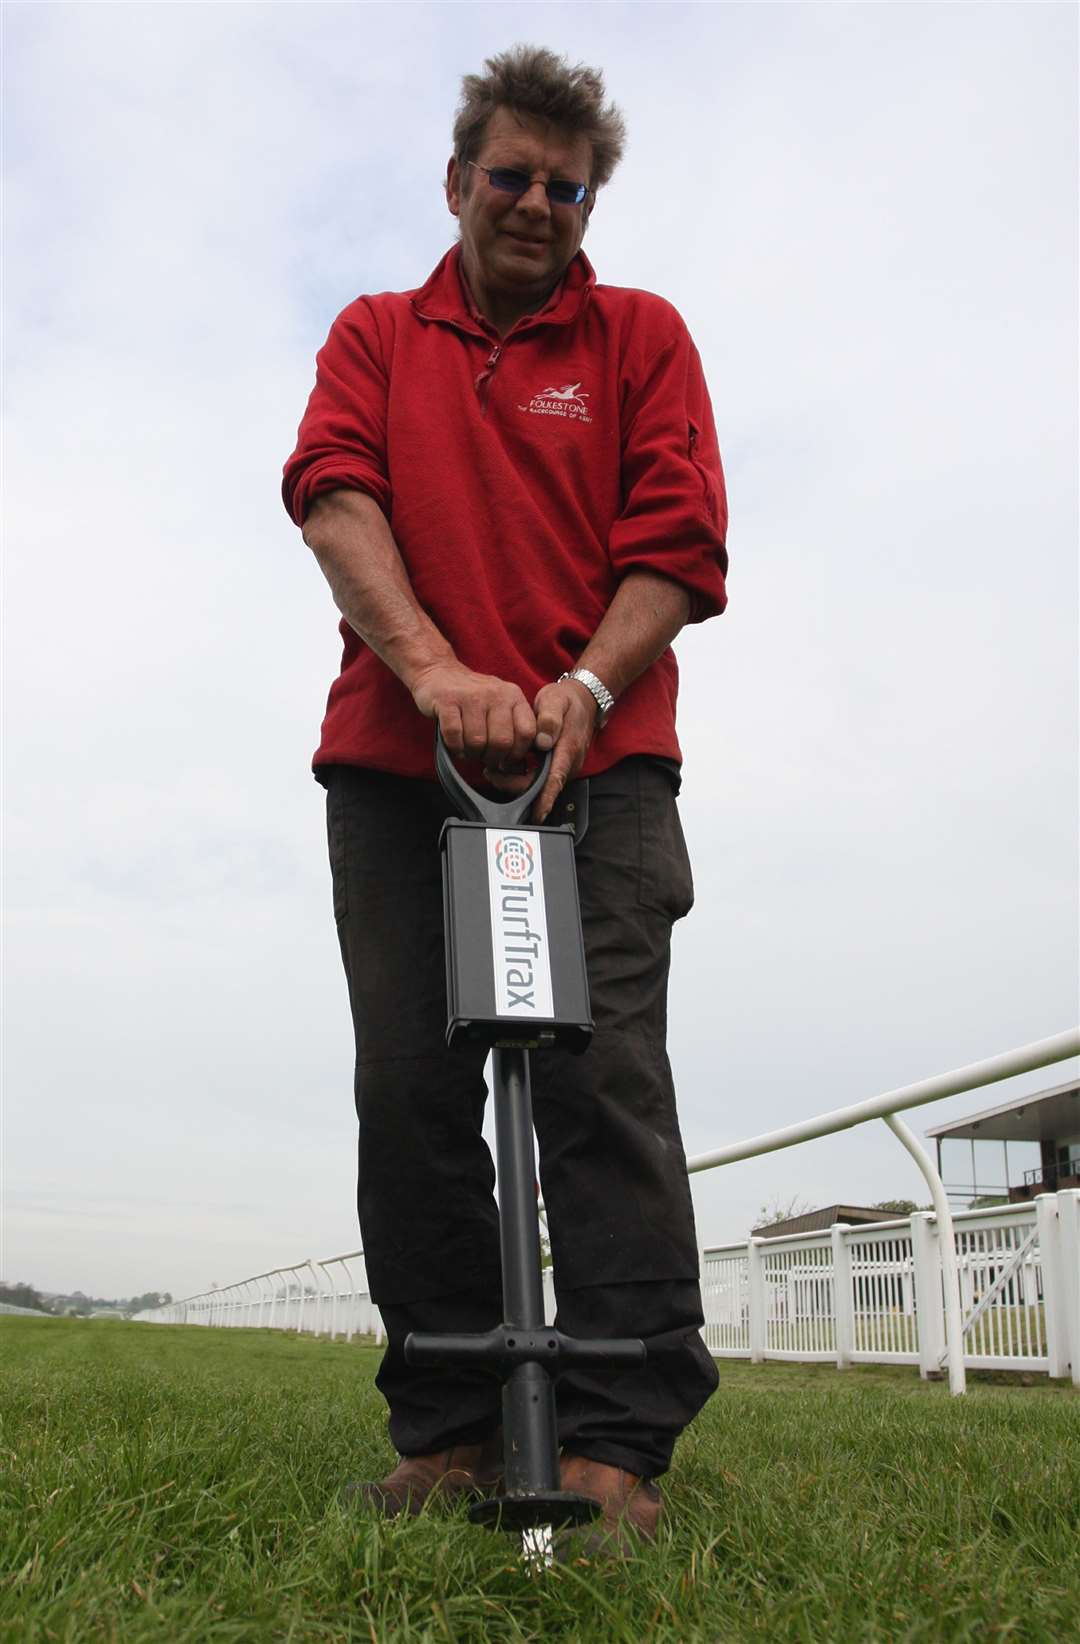 Nigel Barton, groundsman, checks the turf with a Turftrax meter in May 2009. Picture: Chris Denham